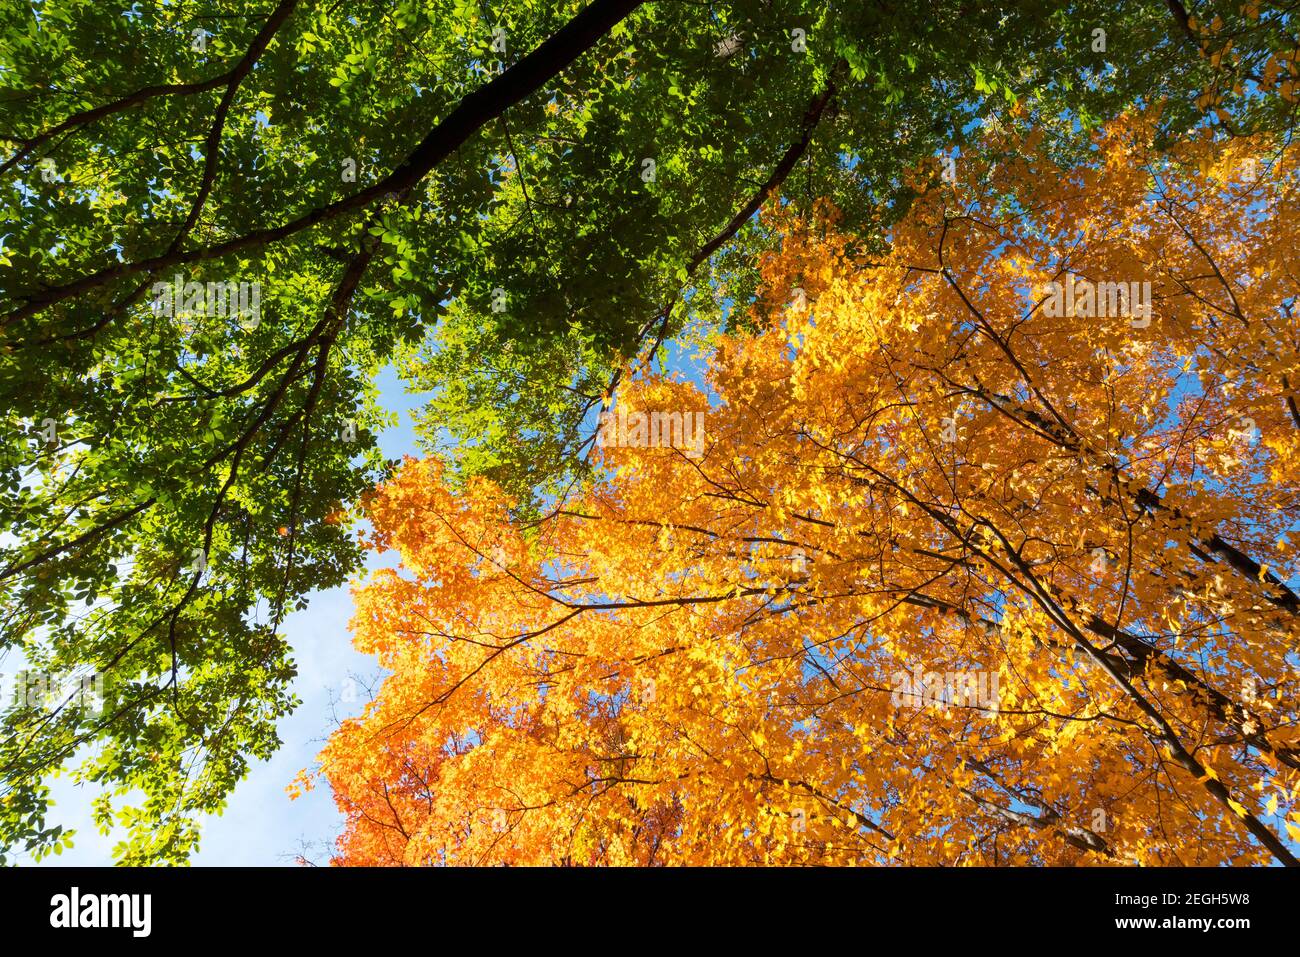 Autumn leaf color trees glows in Central Park at New York City NY USA. Stock Photo